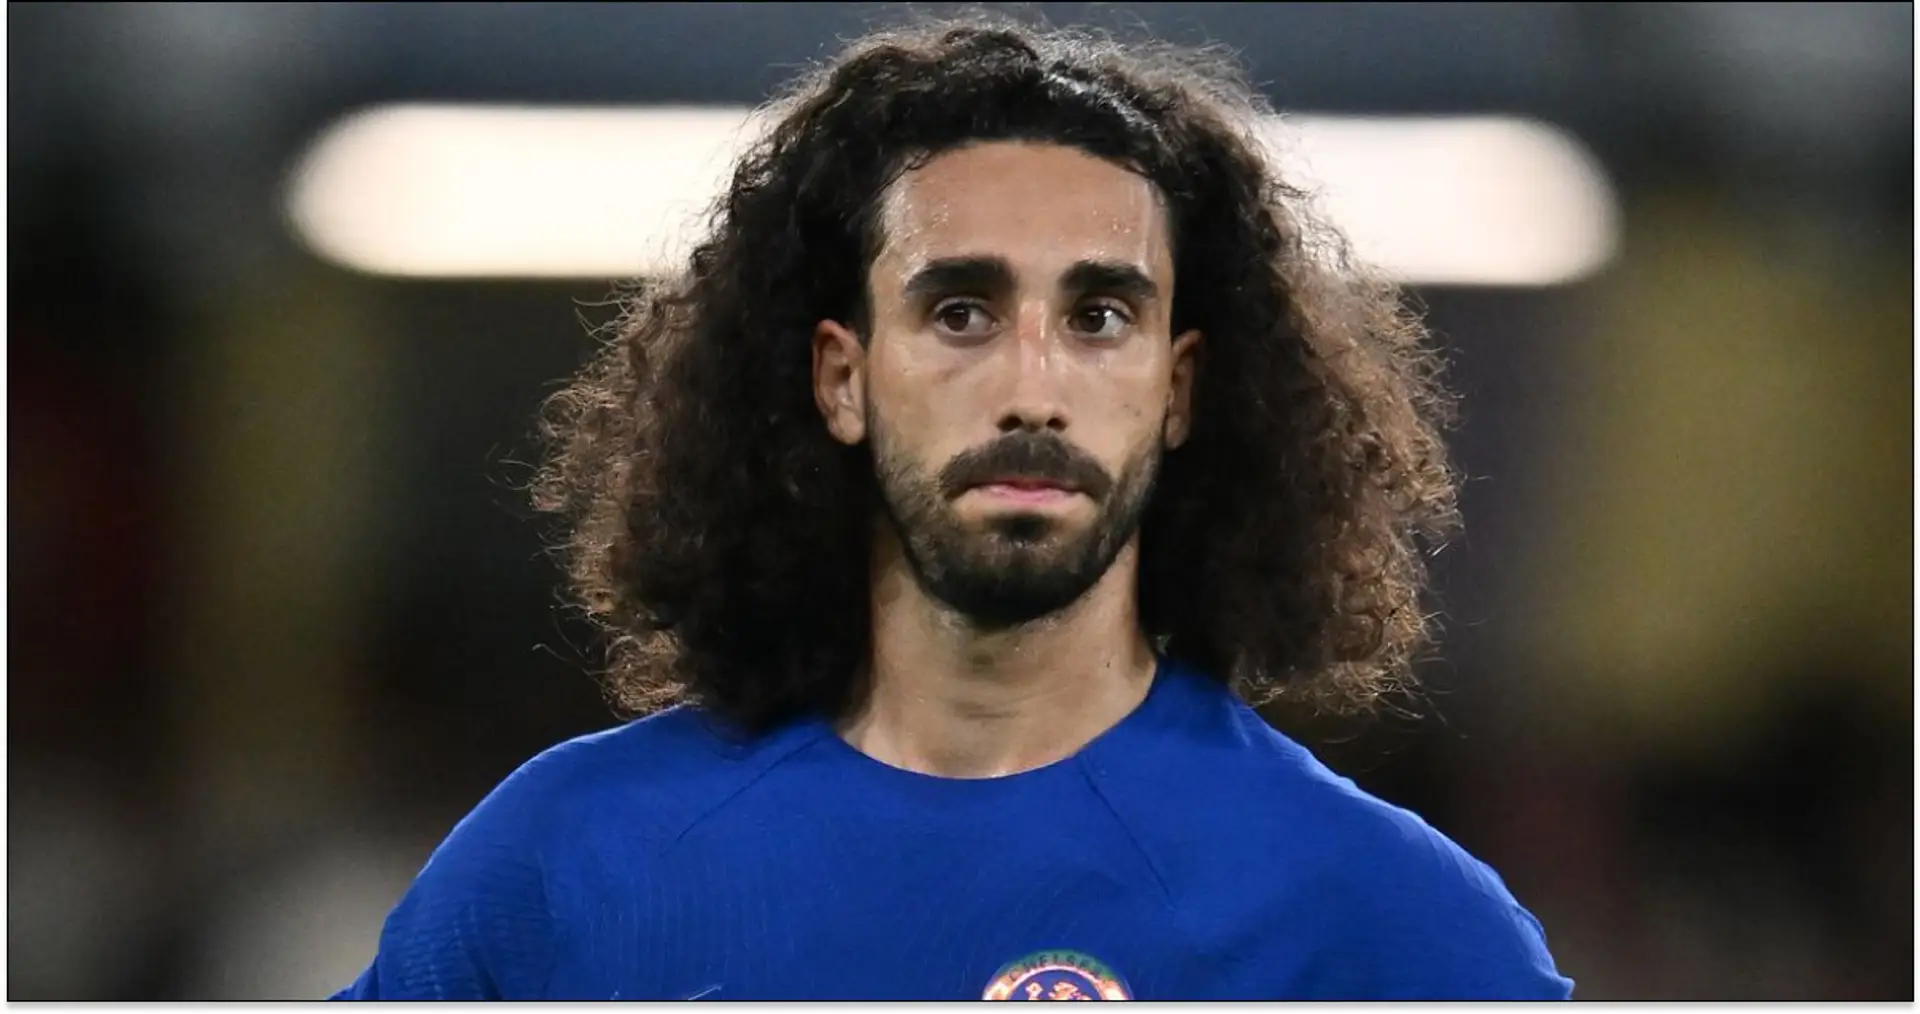 'If you do it, people say you have a good season': Cucurella names one thing he aims to improve